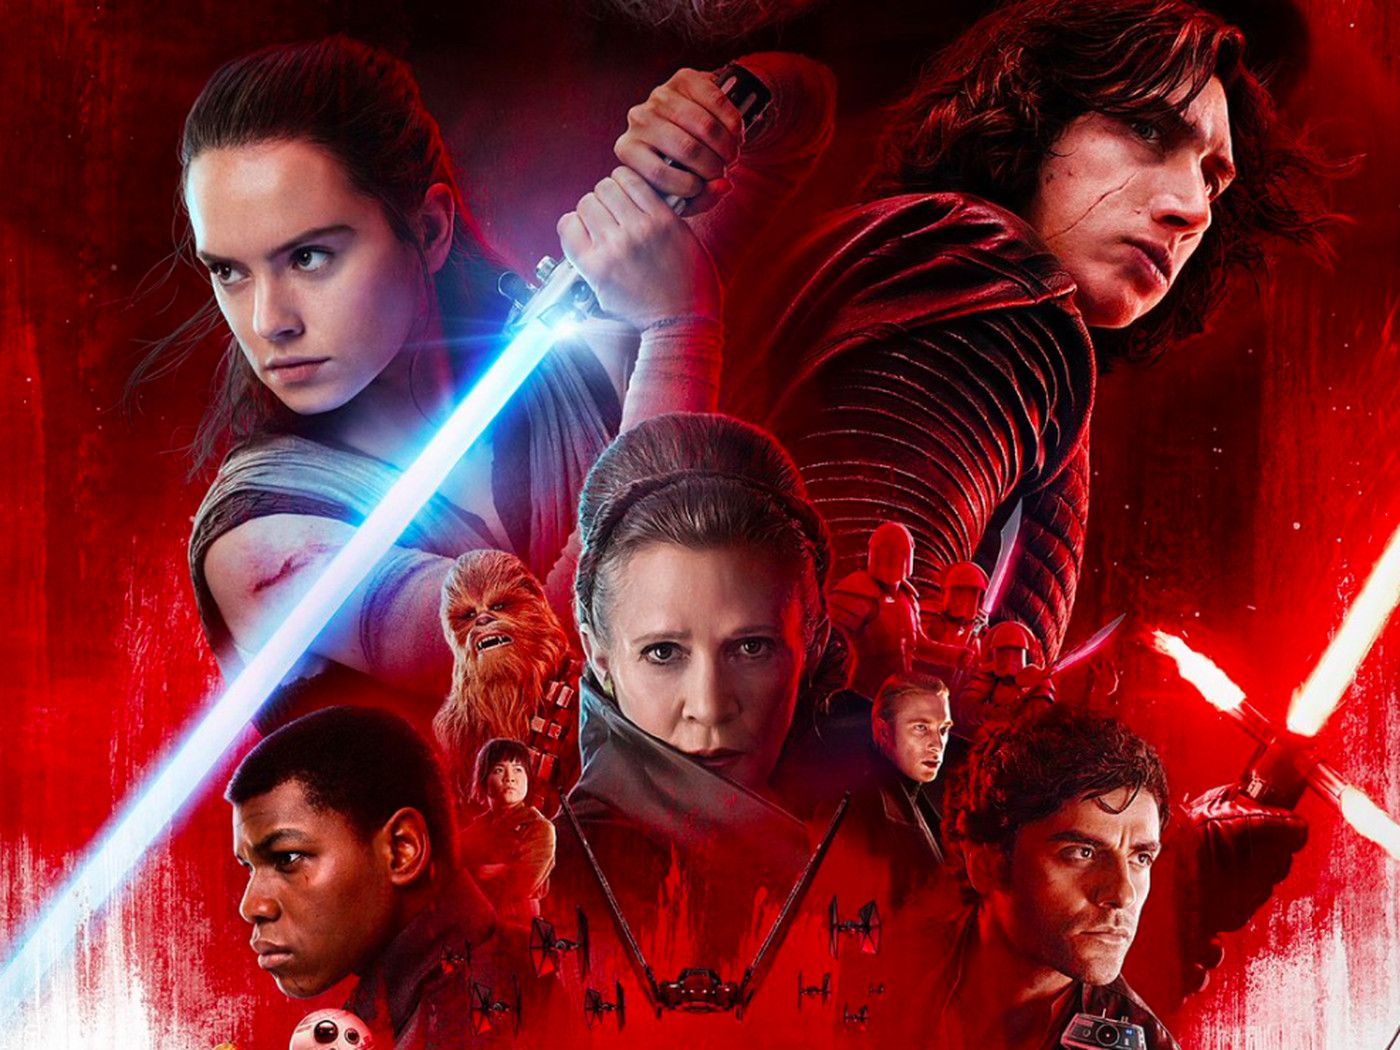 Star Wars: The Last Jedi spoilers: who are Rey's parents?